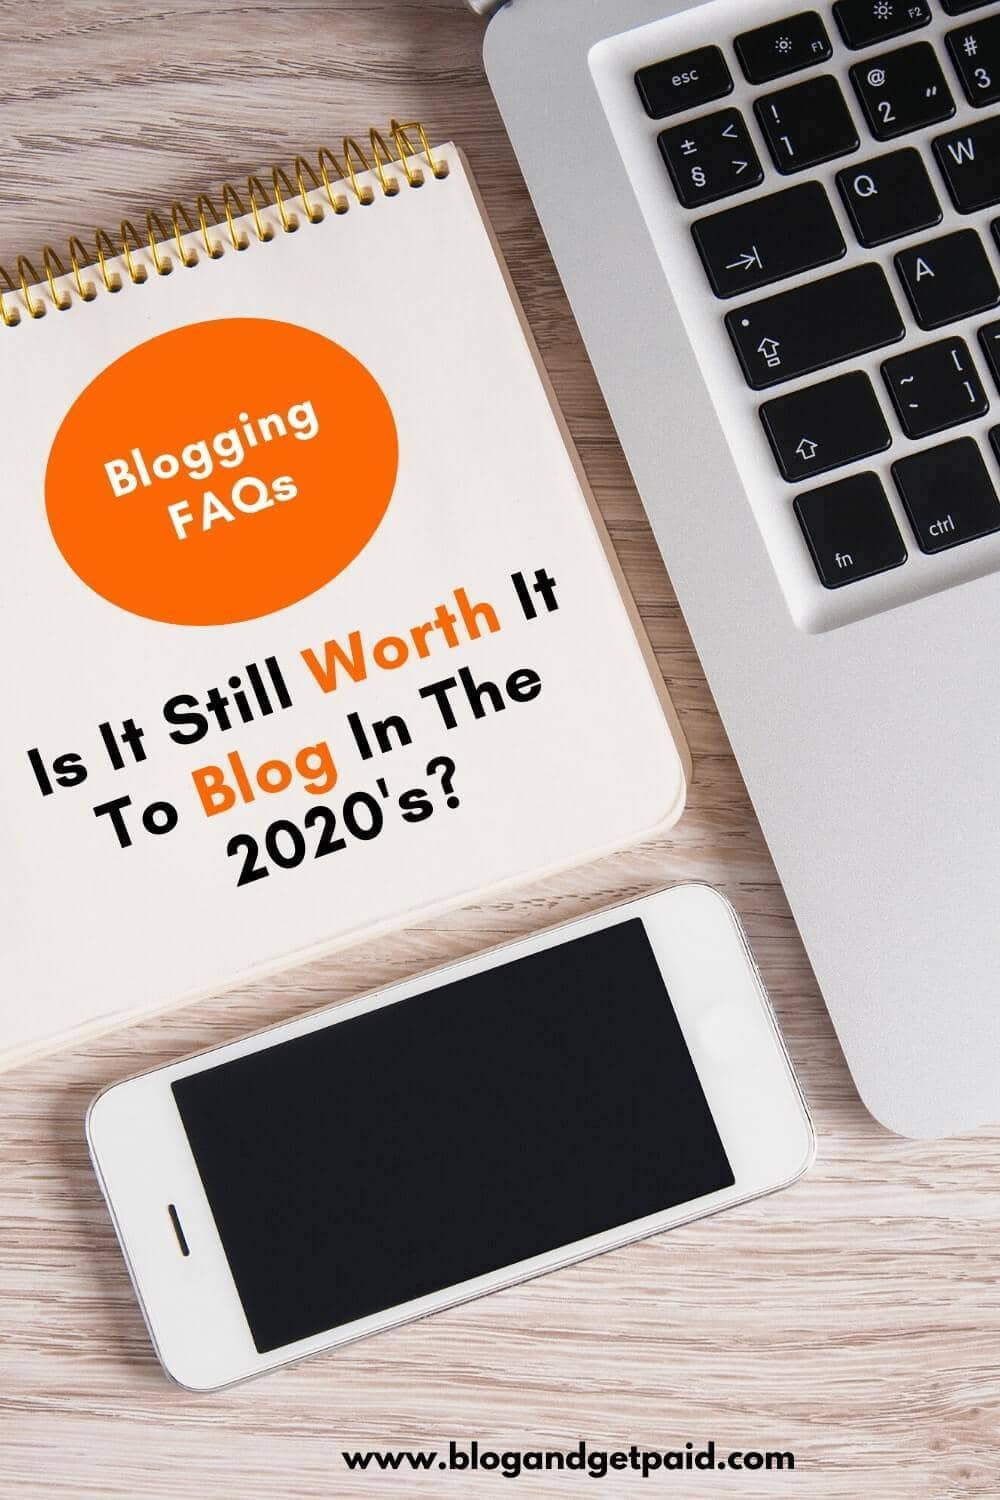 Blogging FAQs: Is It Still Worth It To Blog In The 2020s?